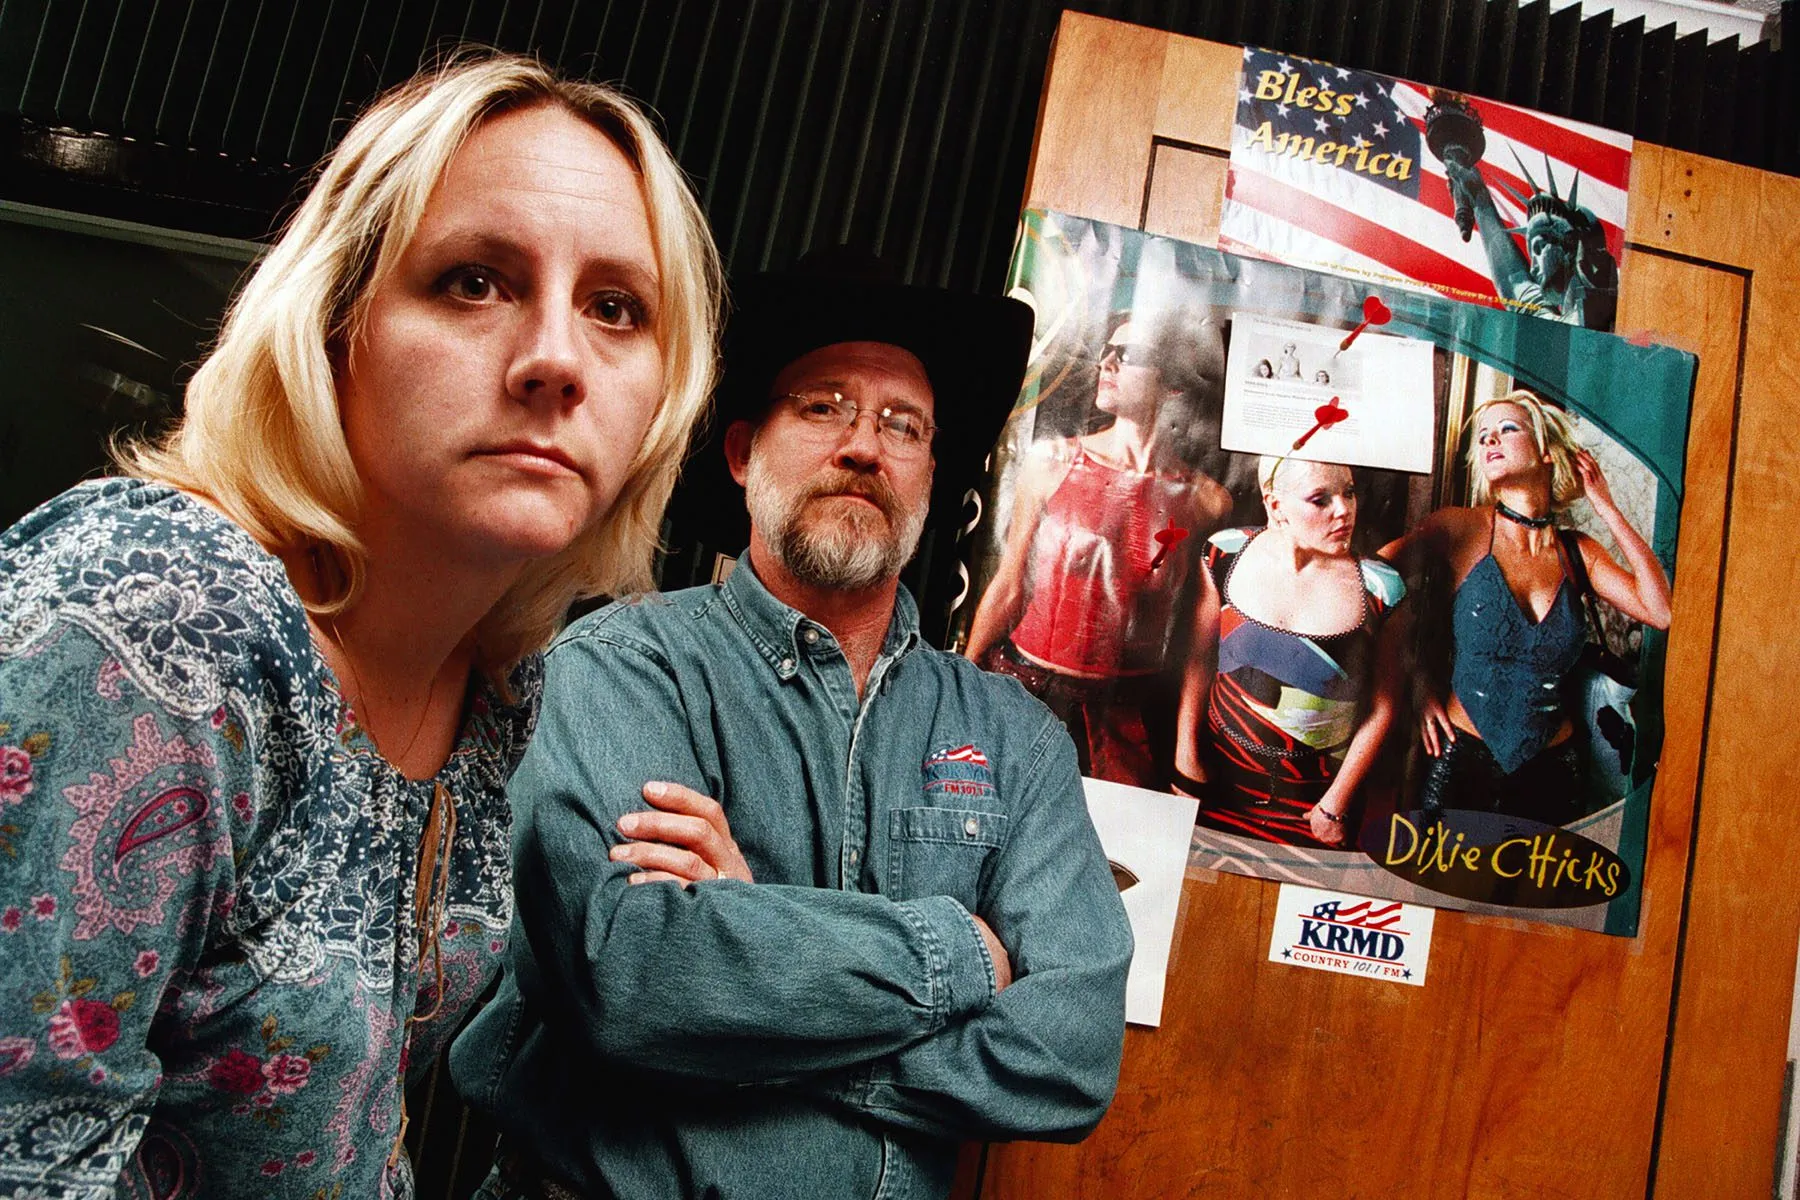 A woman and a man pose for a portrait in a radio studio. Behind them is a poster of The Chicks on which red darts are scattered.